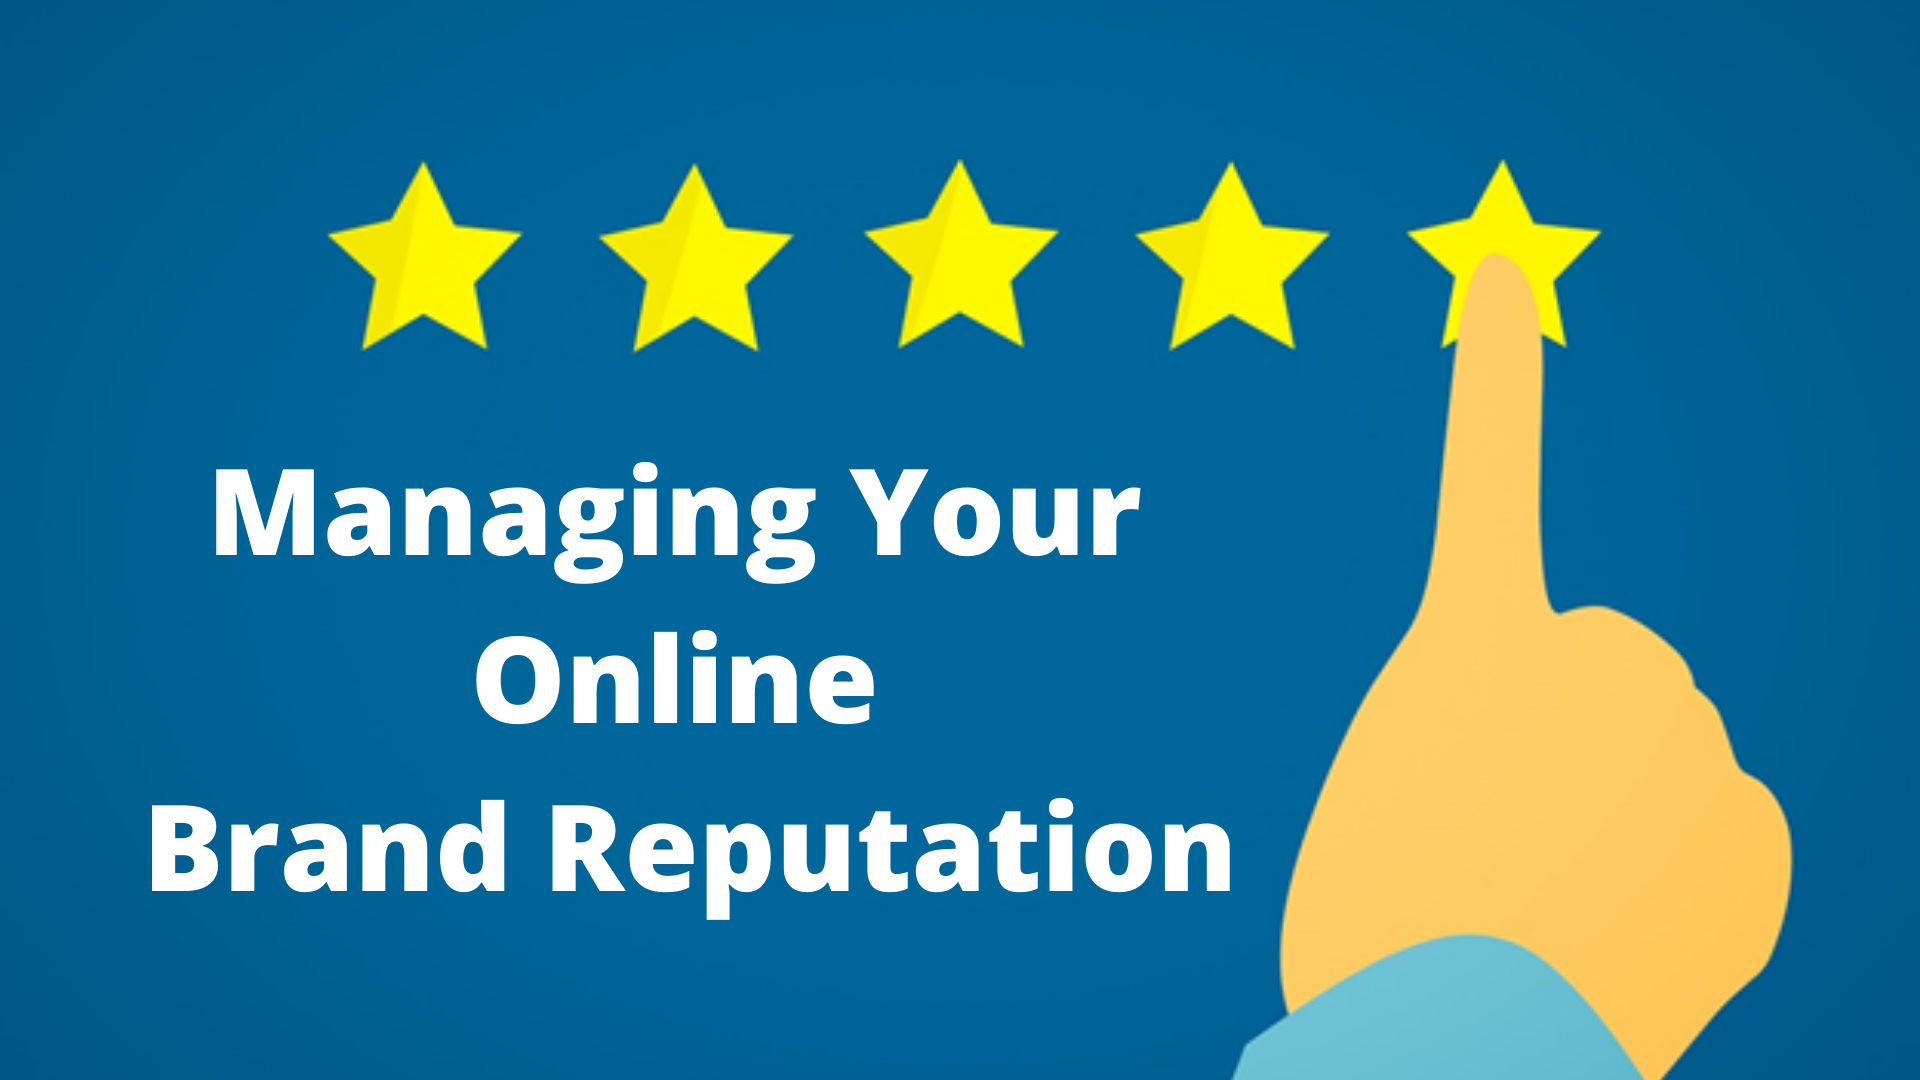 Top Tips on Managing Your Online Brand Reputation